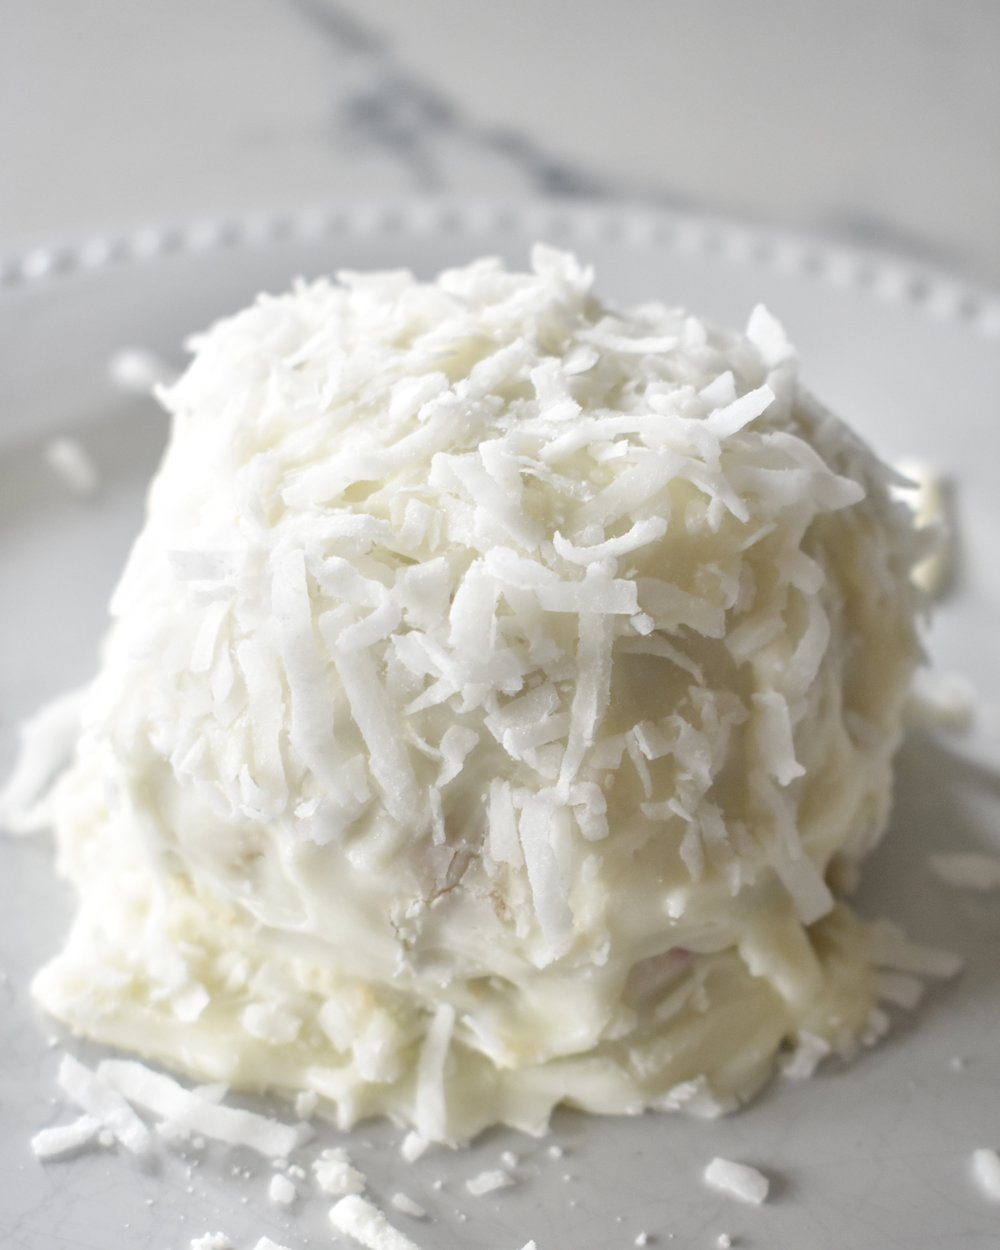 Christmas in July: Ice Cream & Coconut Snowball Recipe